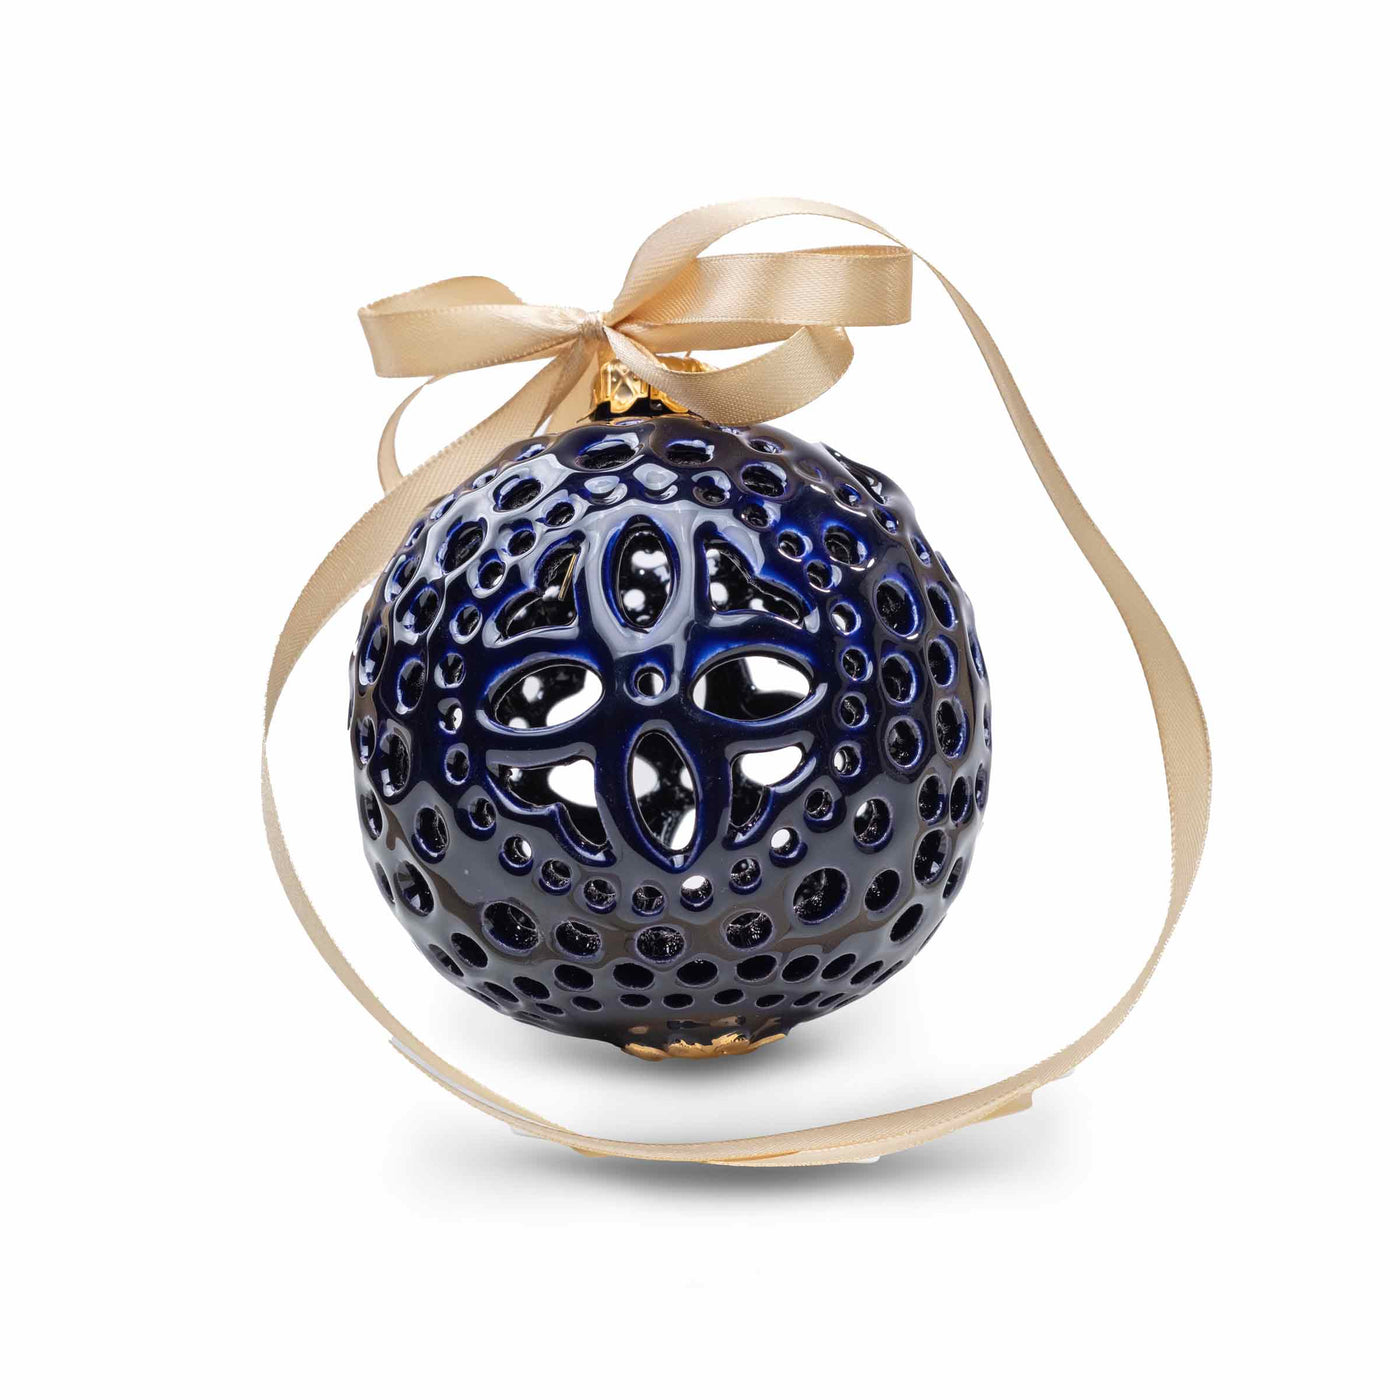 Ceramic Openwork Christmas Balls BAUBLES Set of 4 by E-Pottery 05